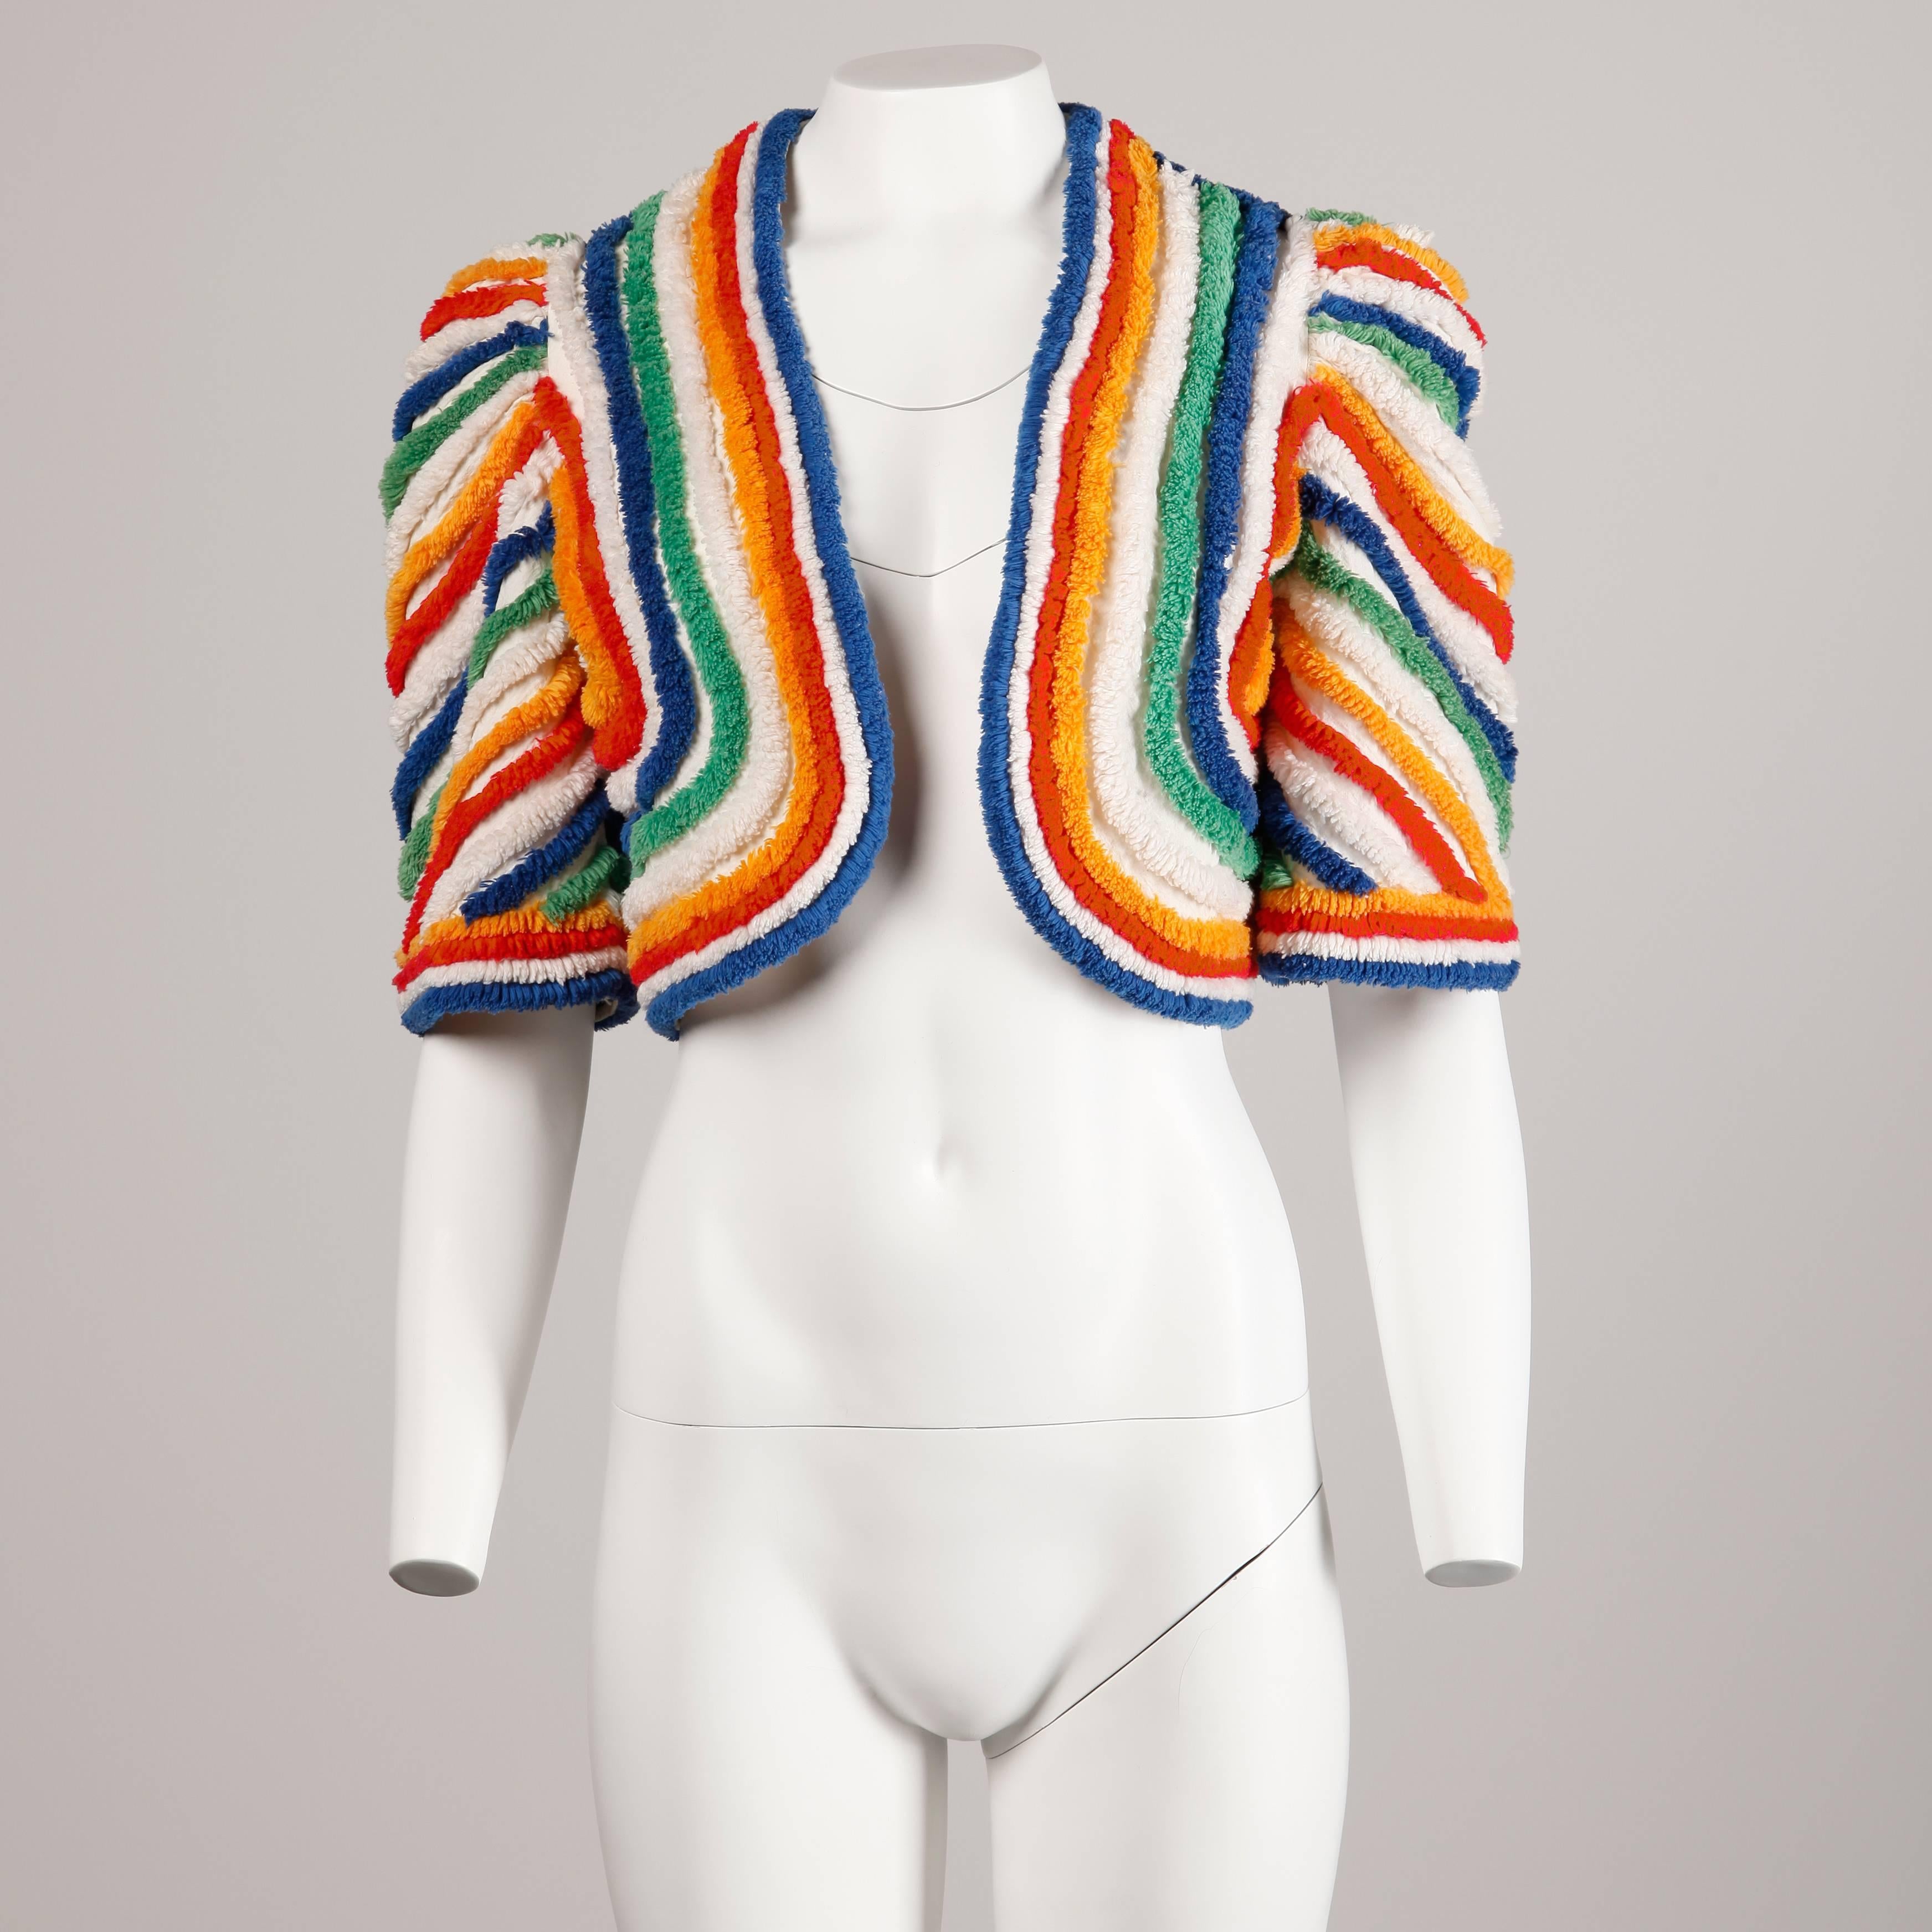 Incredible vintage 1940s bolero jacket in shaggy terry cloth rainbow stripes! Elbow length puff sleeves and cropped fit. So darling and completely unique!

Details: 

Unlined
Marked Size: Unmarked
Estimated Size: Small
Color: White/ Blue/